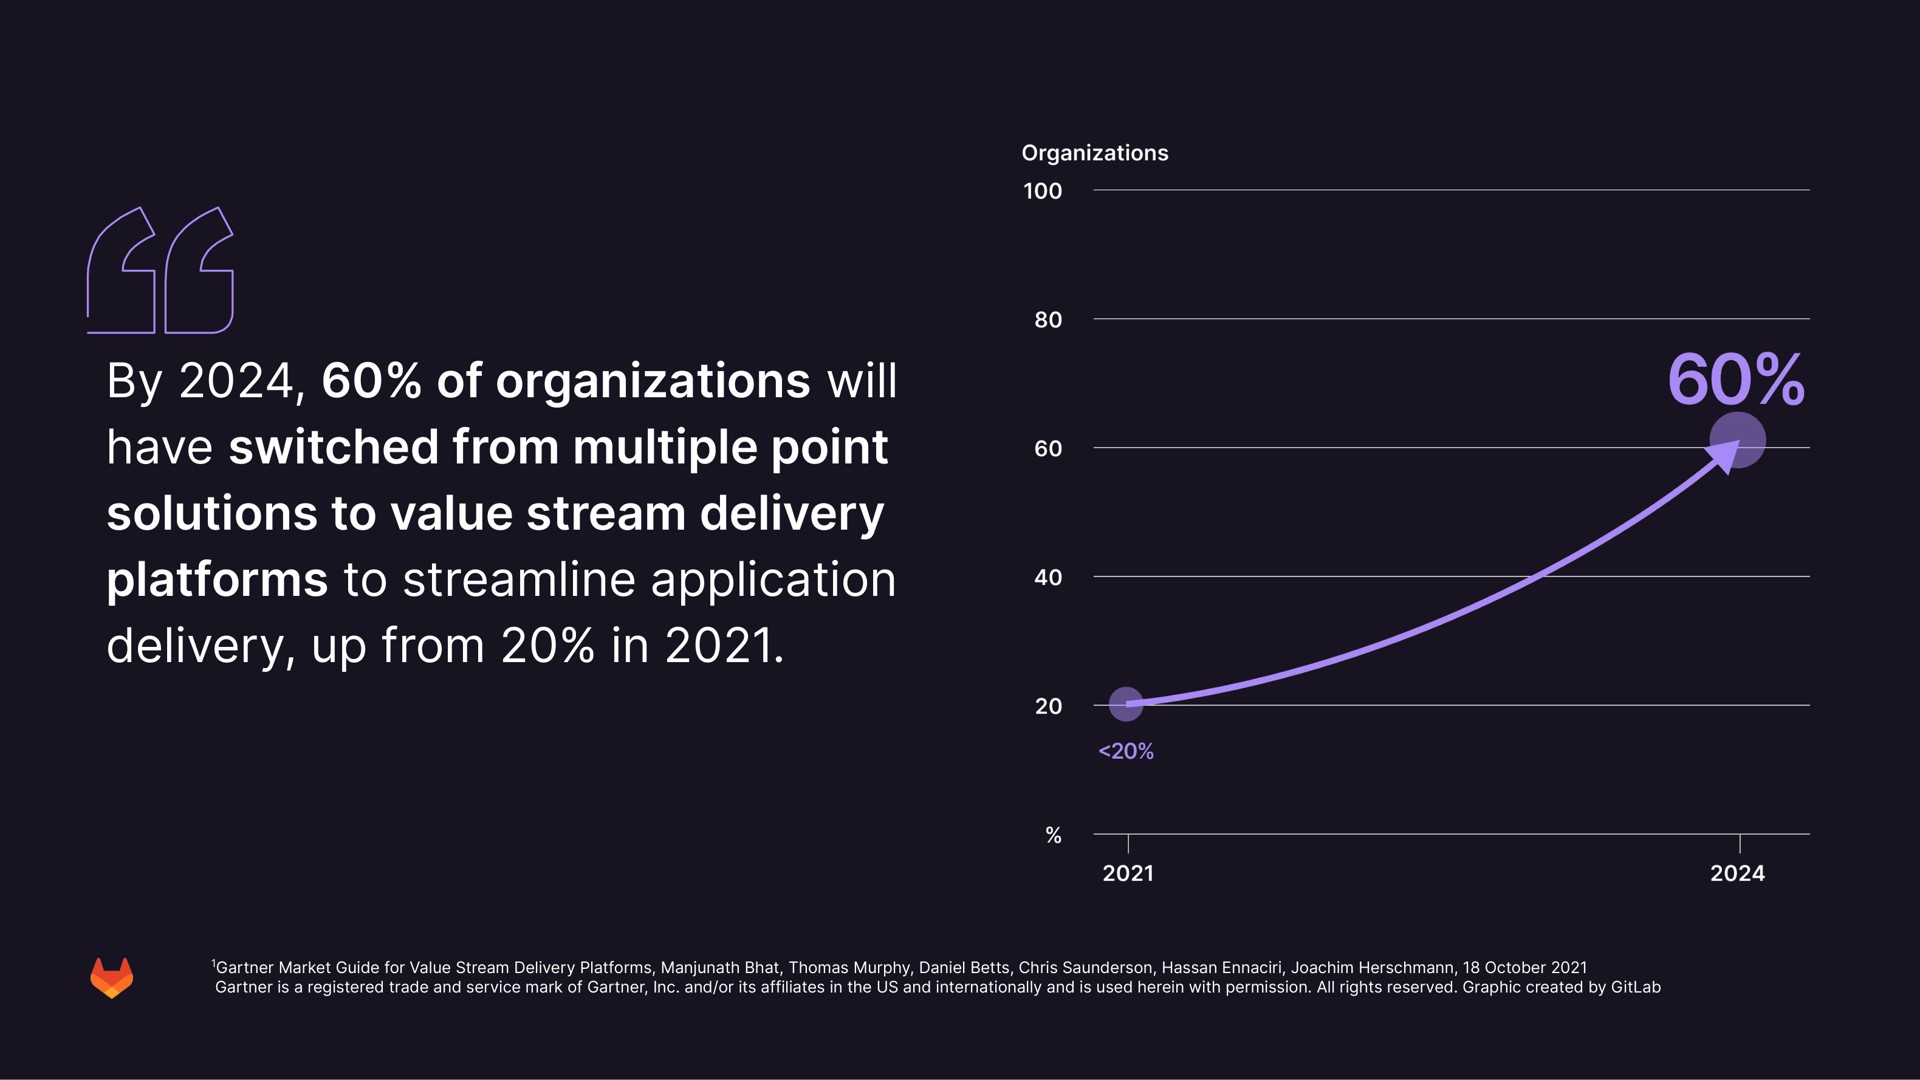 by of organizations will have switched from multiple point solutions to value stream delivery platforms to streamline application delivery up from in | GitLab